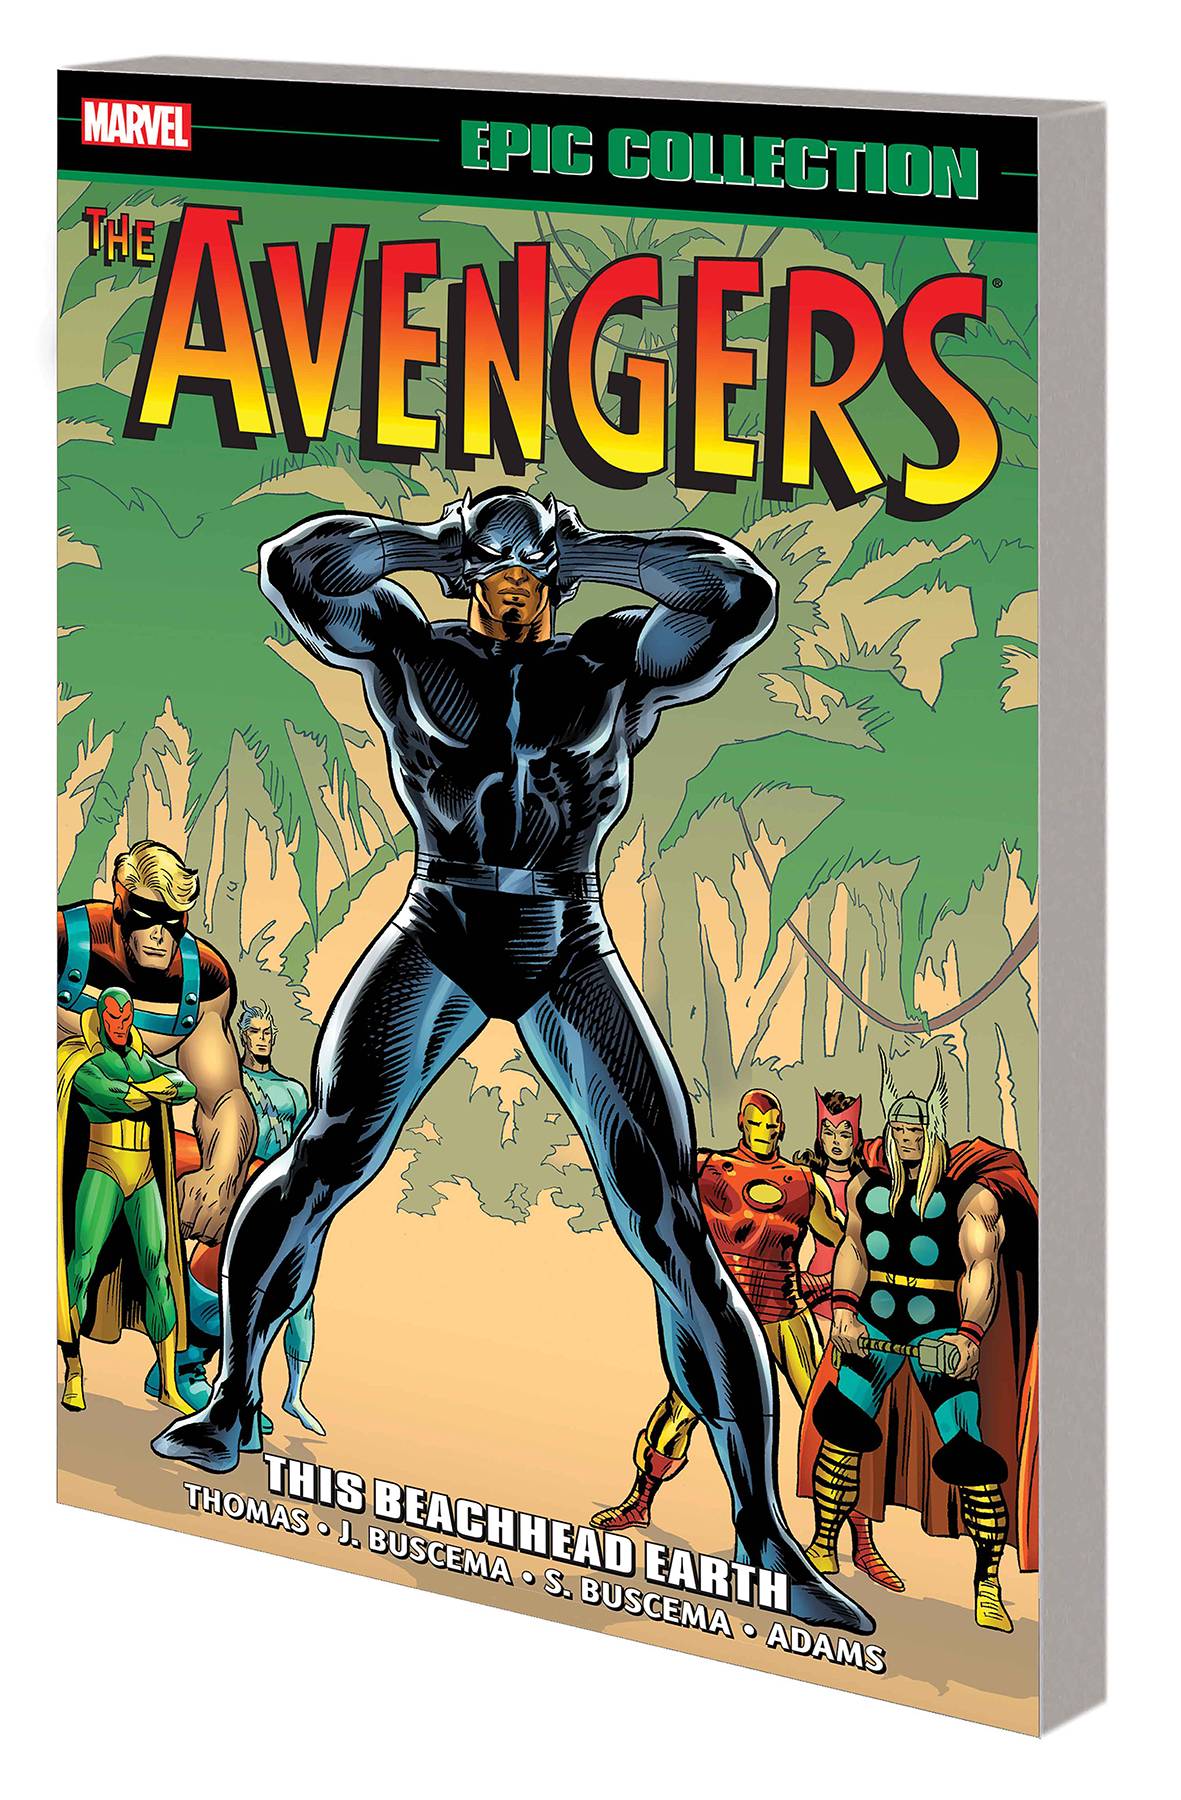 AVENGERS EPIC COLLECTION TP THIS BEACHHEAD EARTH